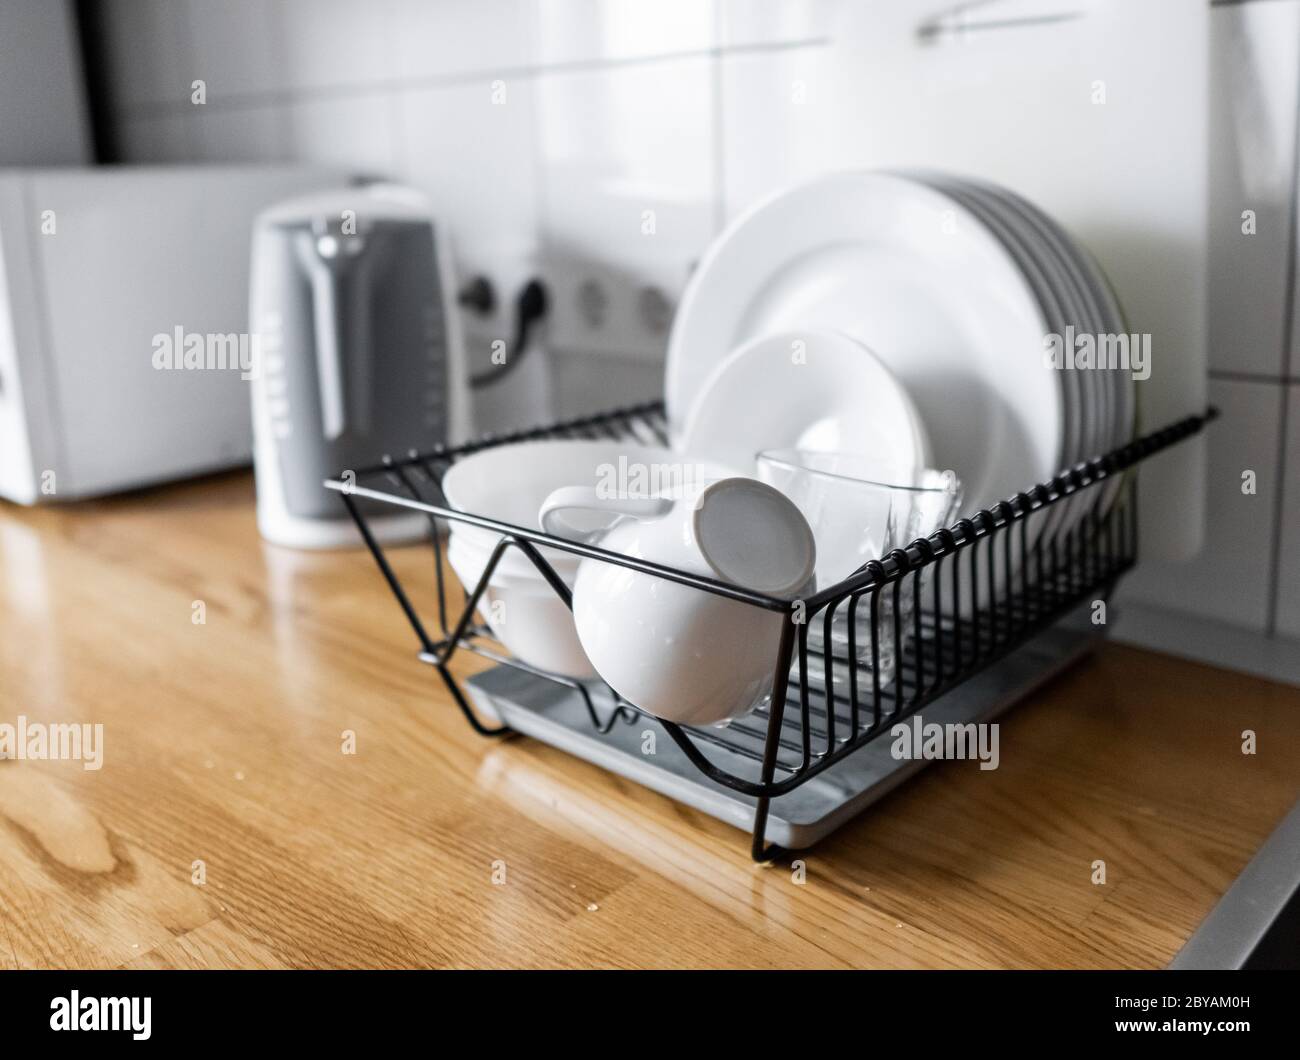 https://c8.alamy.com/comp/2BYAM0H/dish-rack-holds-many-dishes-and-cups-against-wooden-countertop-white-wall-tiles-sink-and-faucet-budget-and-lightweight-antimicrobial-dish-drainer-2BYAM0H.jpg